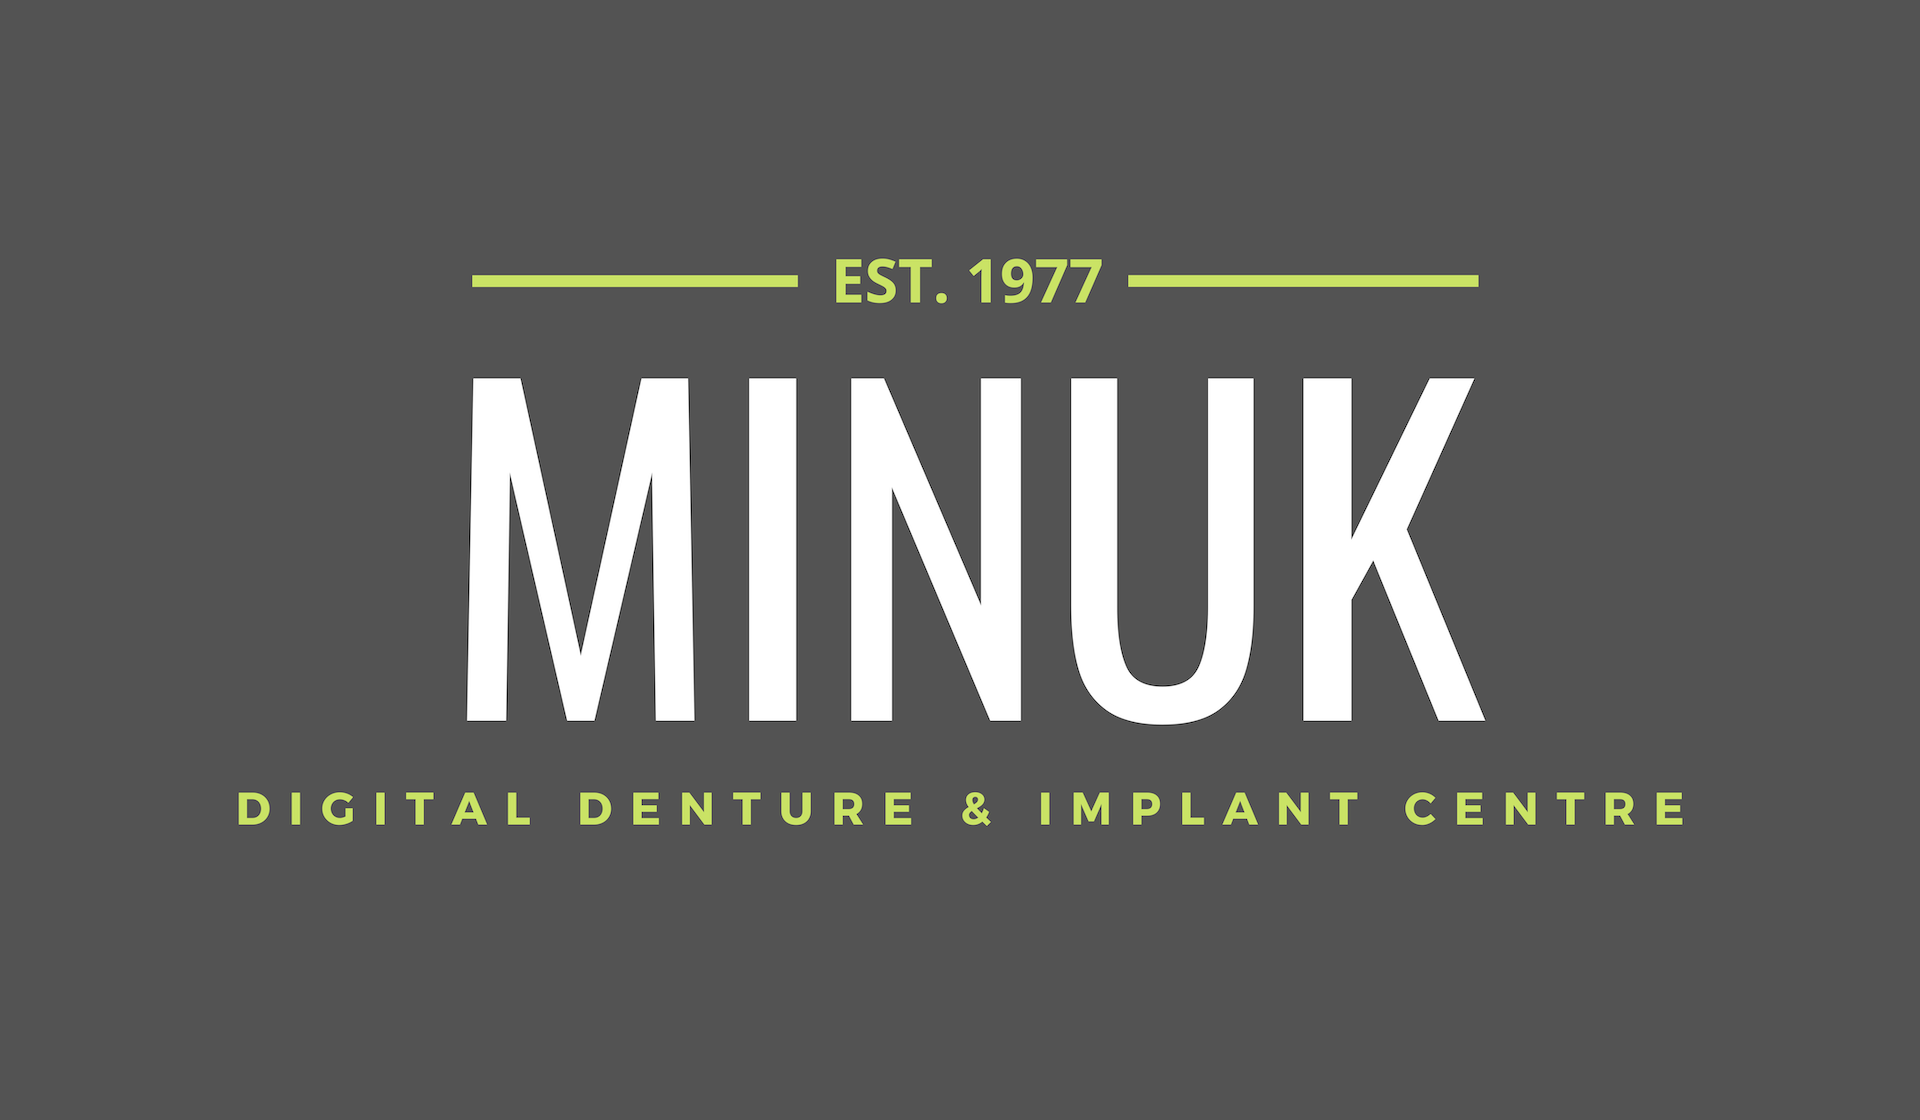 Get A Free Assessment For One-Day Cast Partial Dentures At This Manitoba Clinic